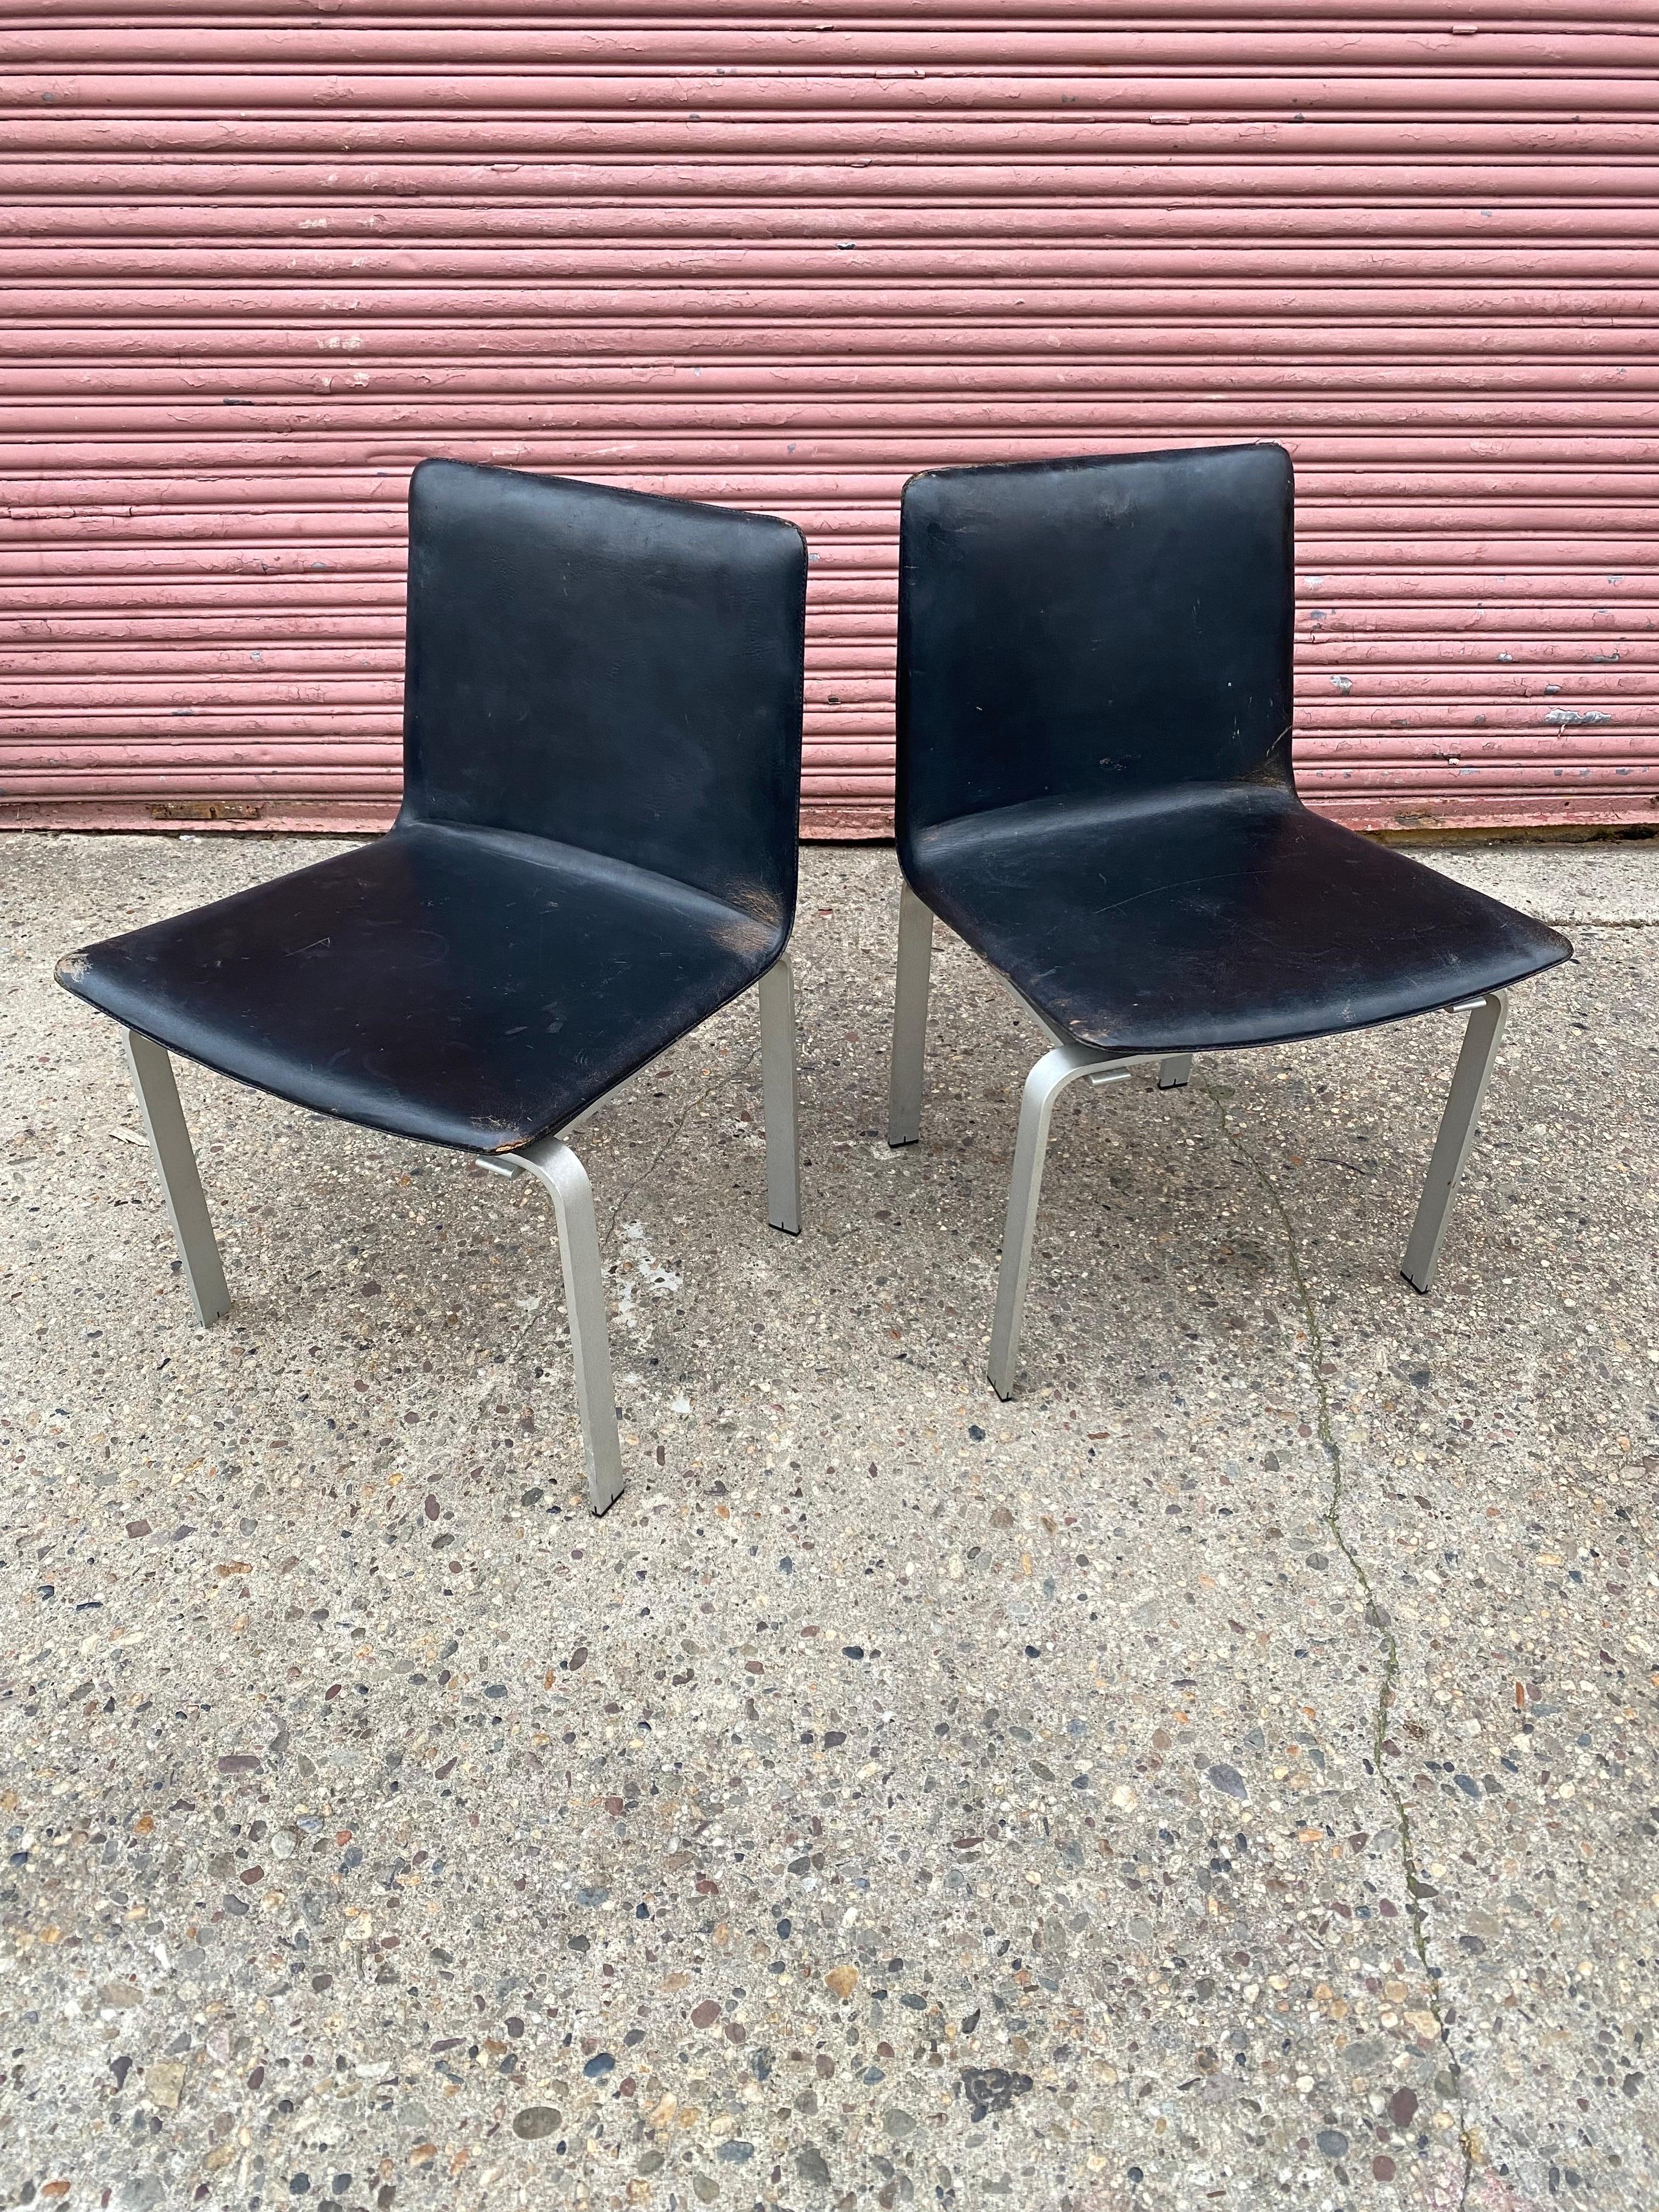 Jorgen Hoj Pair of elegant and handsome Aluminum and leather Chairs.  Hoj was a student of Poul Kjaerholm and the influence is clear.  Beautifully made.  This pair shows wear and tear!  Edge wear to leather and one plastic foot is missing!  See